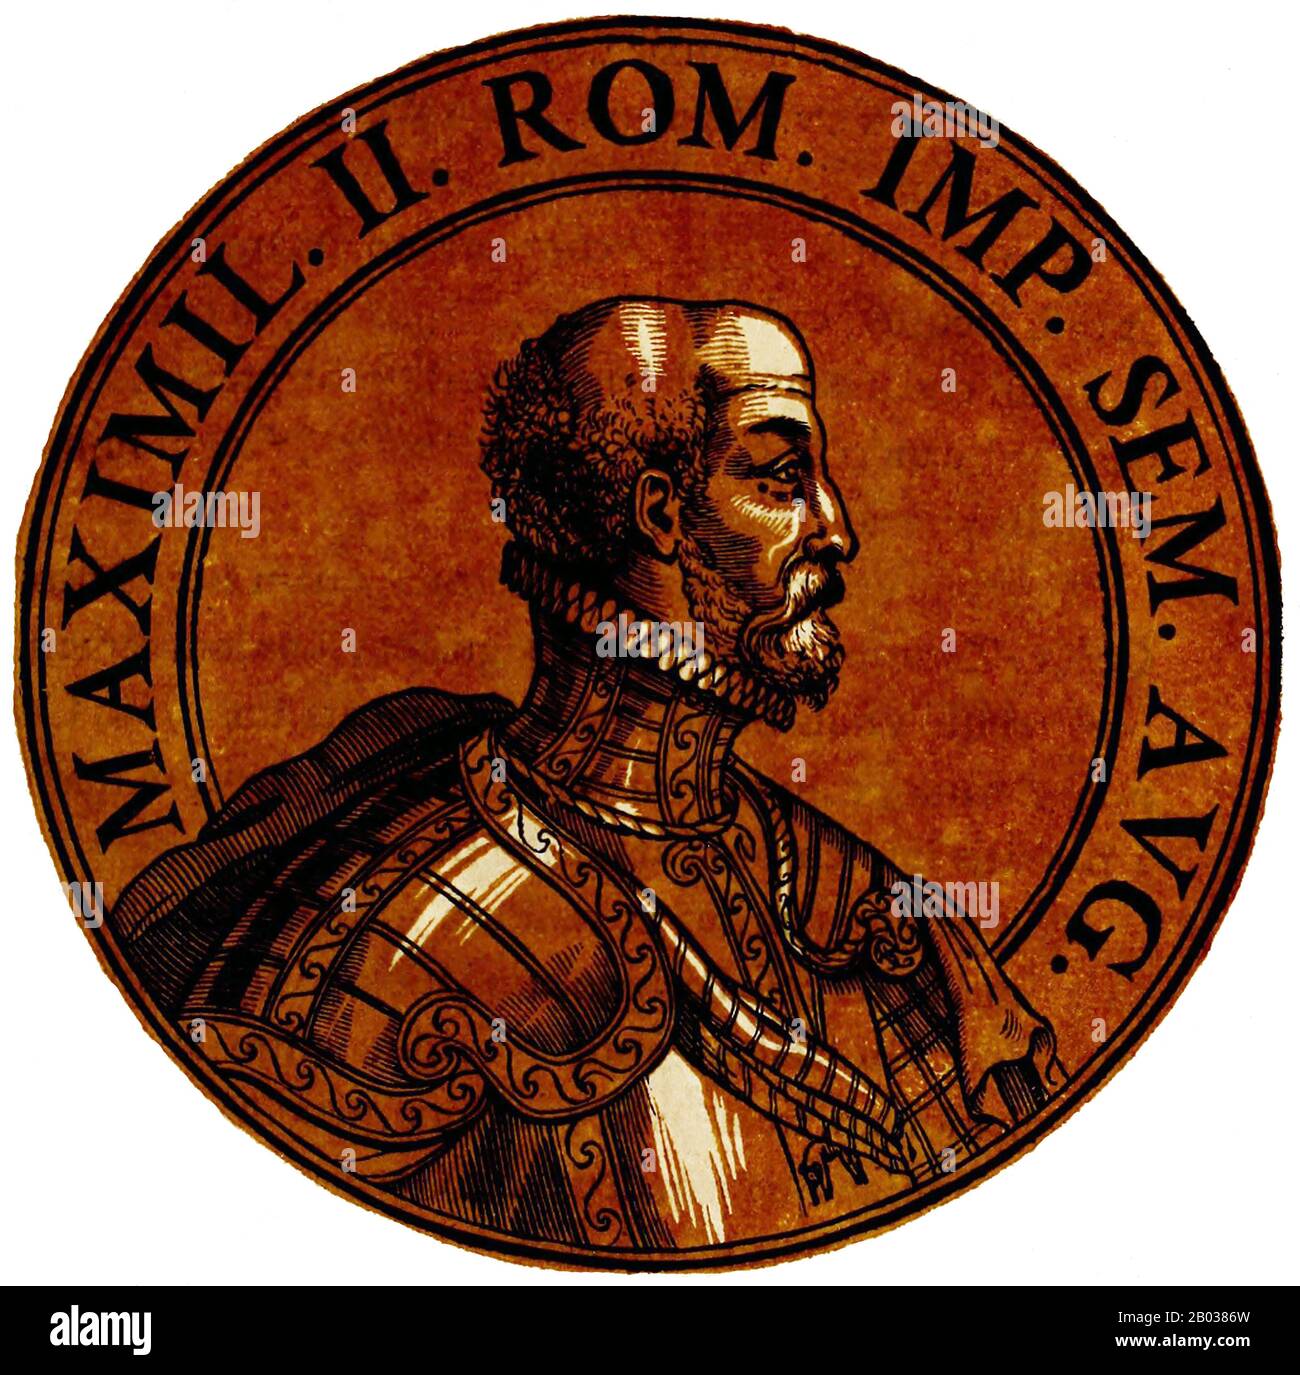 Maximilian II (1527-1576) was the son of Emperor Ferdinand I. He served during the Italian Wars in 1544, as well as the Schmalkadic War. His uncle, Emperor Charles V, made him marry his cousin and Charles' daughter Mary of Spain in 1548, and Maximilian acted temporarily as the emperor's representative in Spain. Questions of succession soon saw trouble brew between the German and Spanish branches of the Habsburg dynasty, and it was suspected that Maximilian was poisoned in 1552 by those in league with his cousin and brother-in-law, Philip II.  The relationship between Maximilian and his cousin Stock Photo